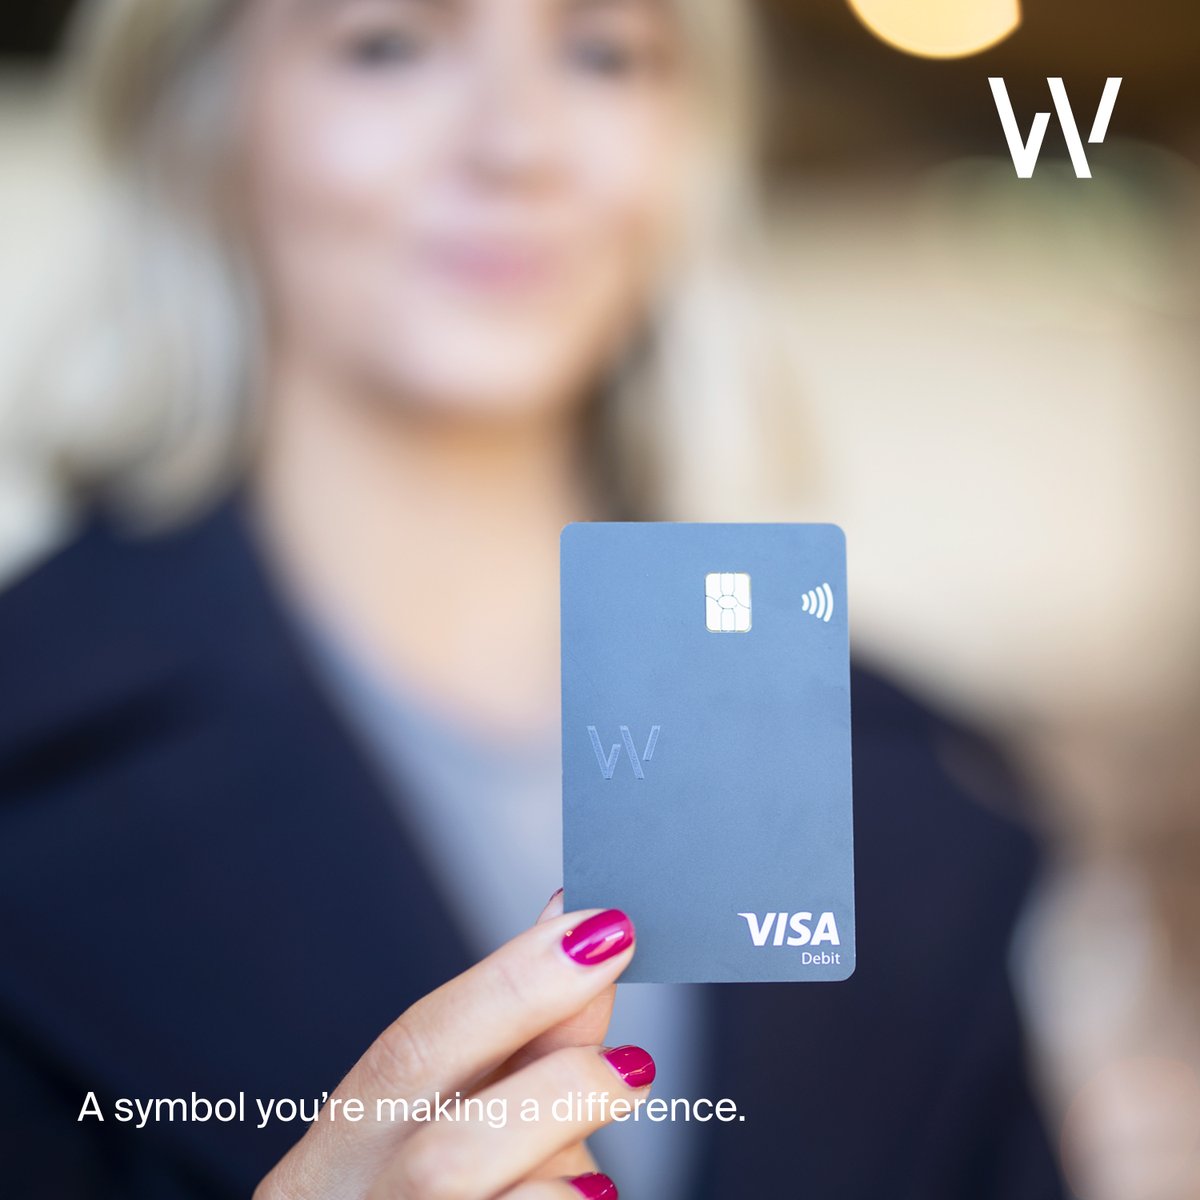 Access your funds anytime, anywhere. The WLTH Card is a mortgage offset linked VISA debit card created from intercepted and upcycled marine plastic waste. Head to the impact section of our website to learn more.

#beachcleanups #mortgage #offsetaccounts